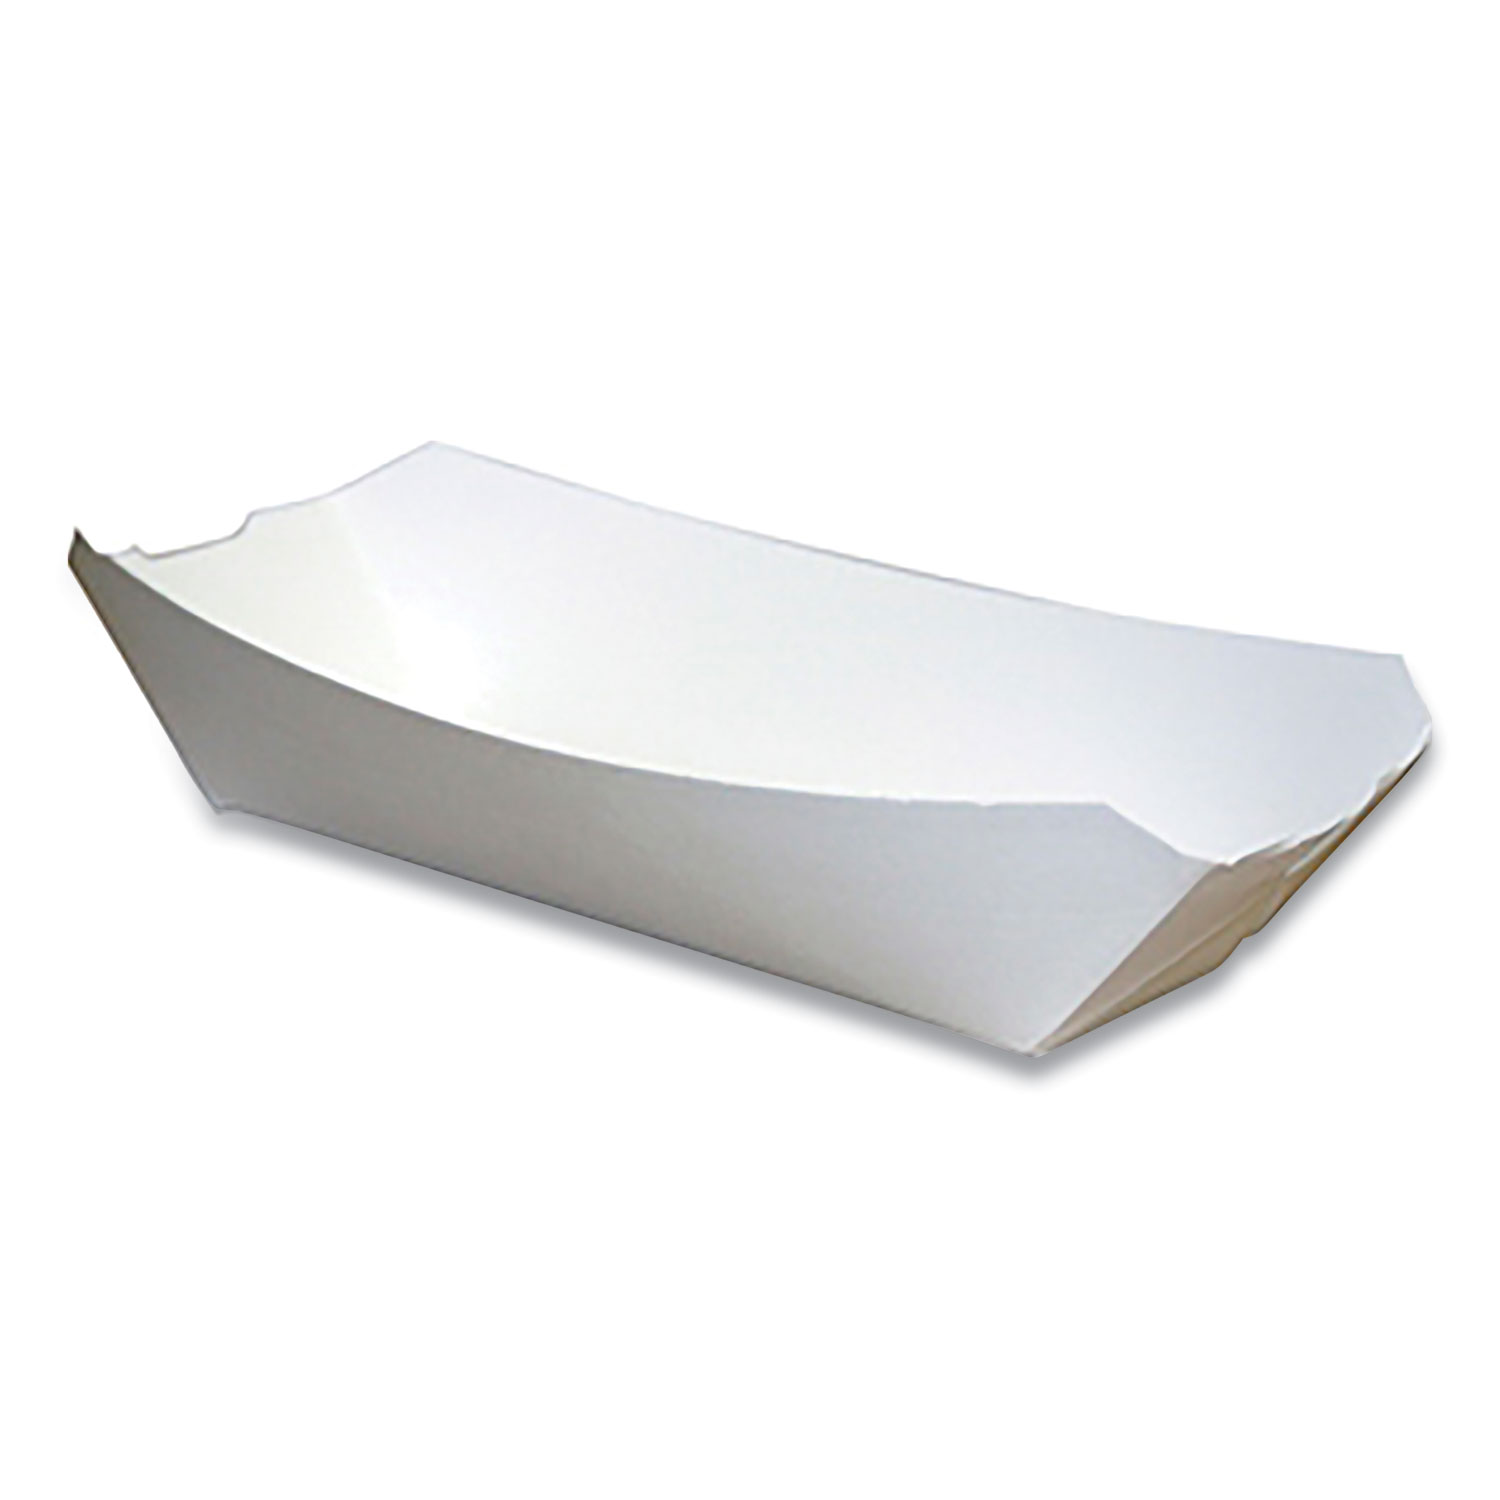 Pactiv Paperboard Food Trays, #12 Beers Tray, 6 x 4 x 1.5, White, 300/Carton